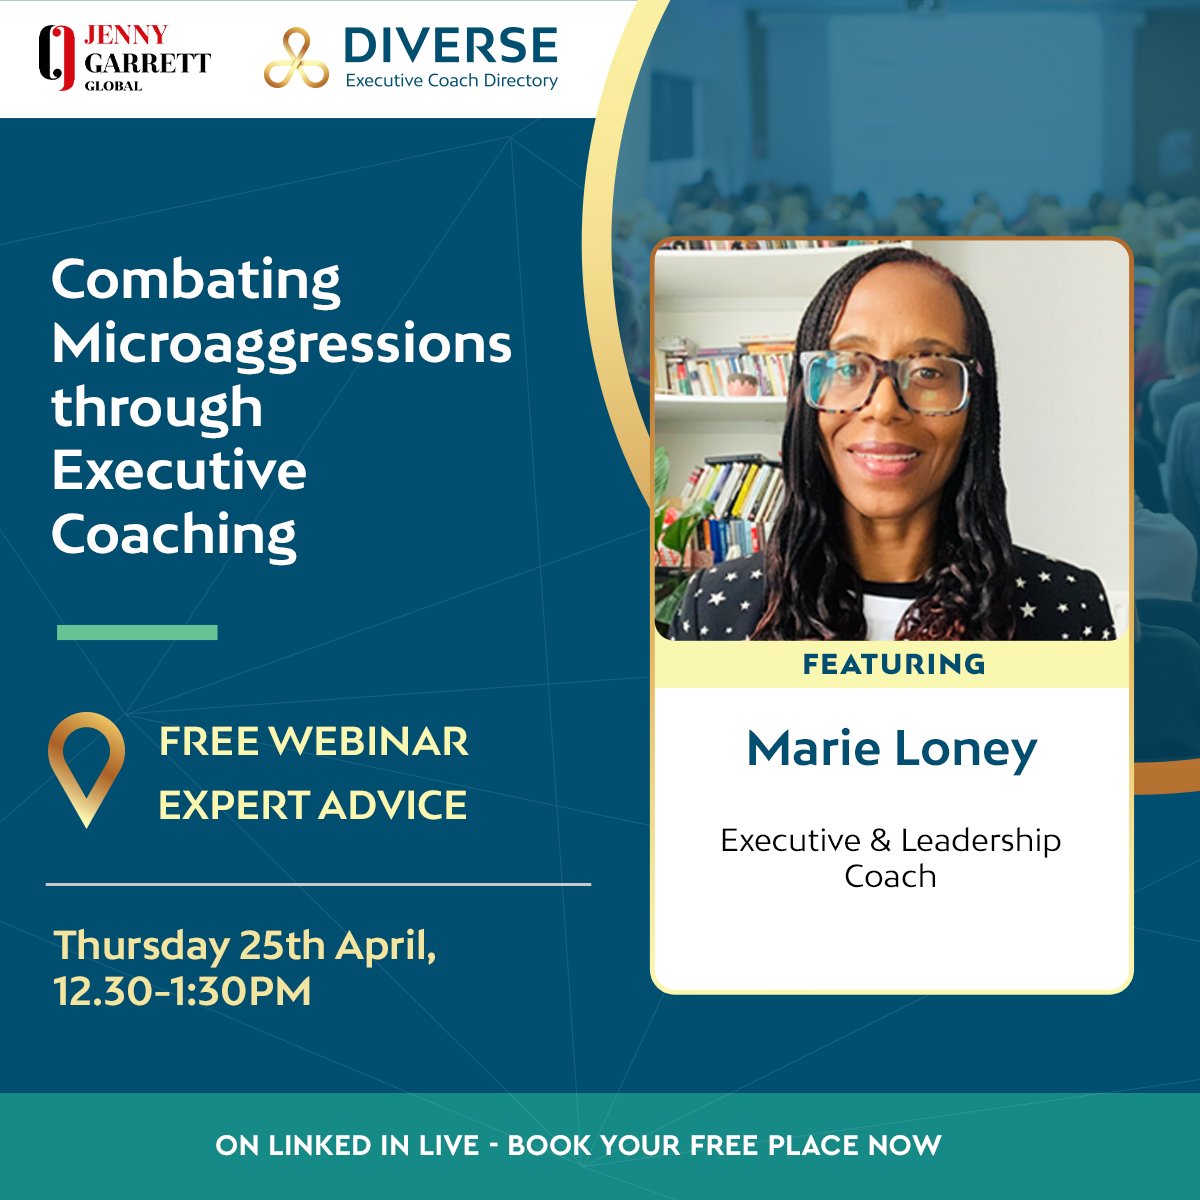 Tired of the subtle abrasions tearing down your team's morale? Join our free webinar designed to empower UK HR and DEI leaders Don't miss out on valuable insights from esteemed speaker @marieloney and more! bit.ly/4cy2DCM #Webinar #Inclusion #DEI👥